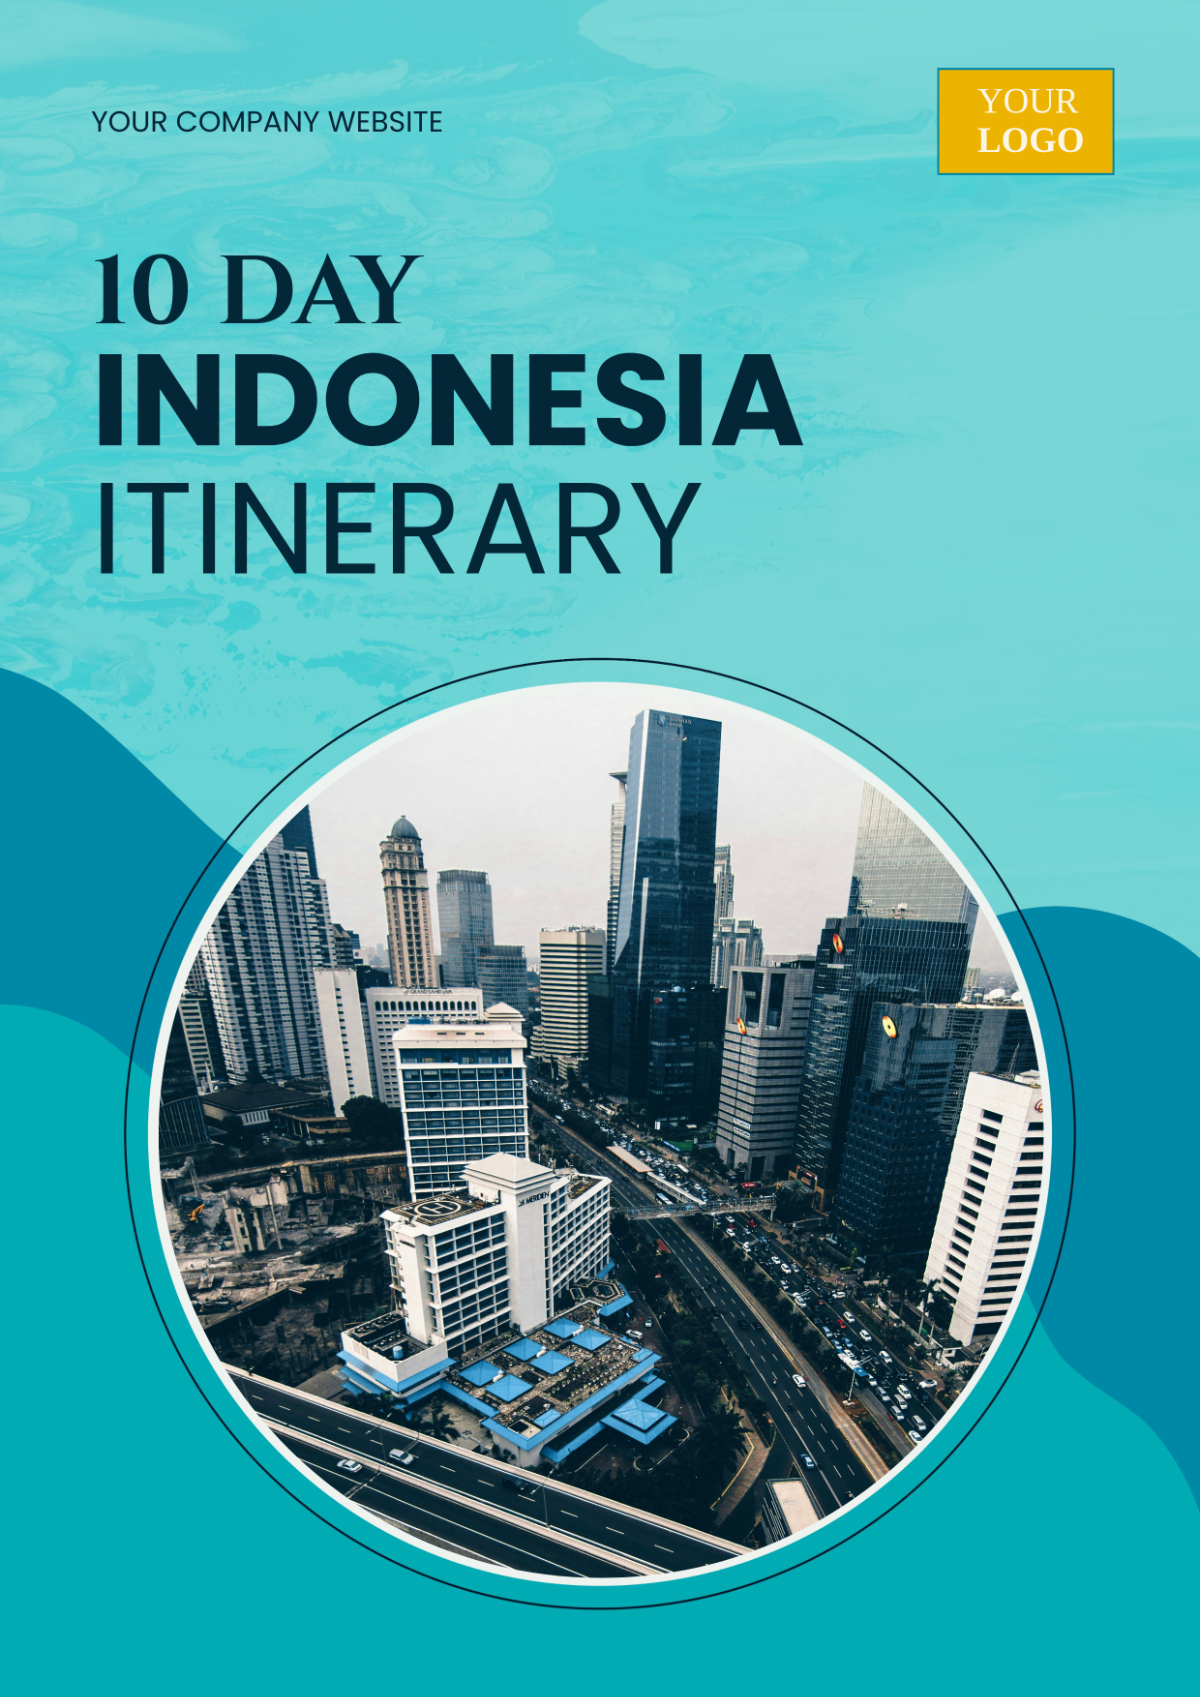 Free 10 Day Indonesia Itinerary Template